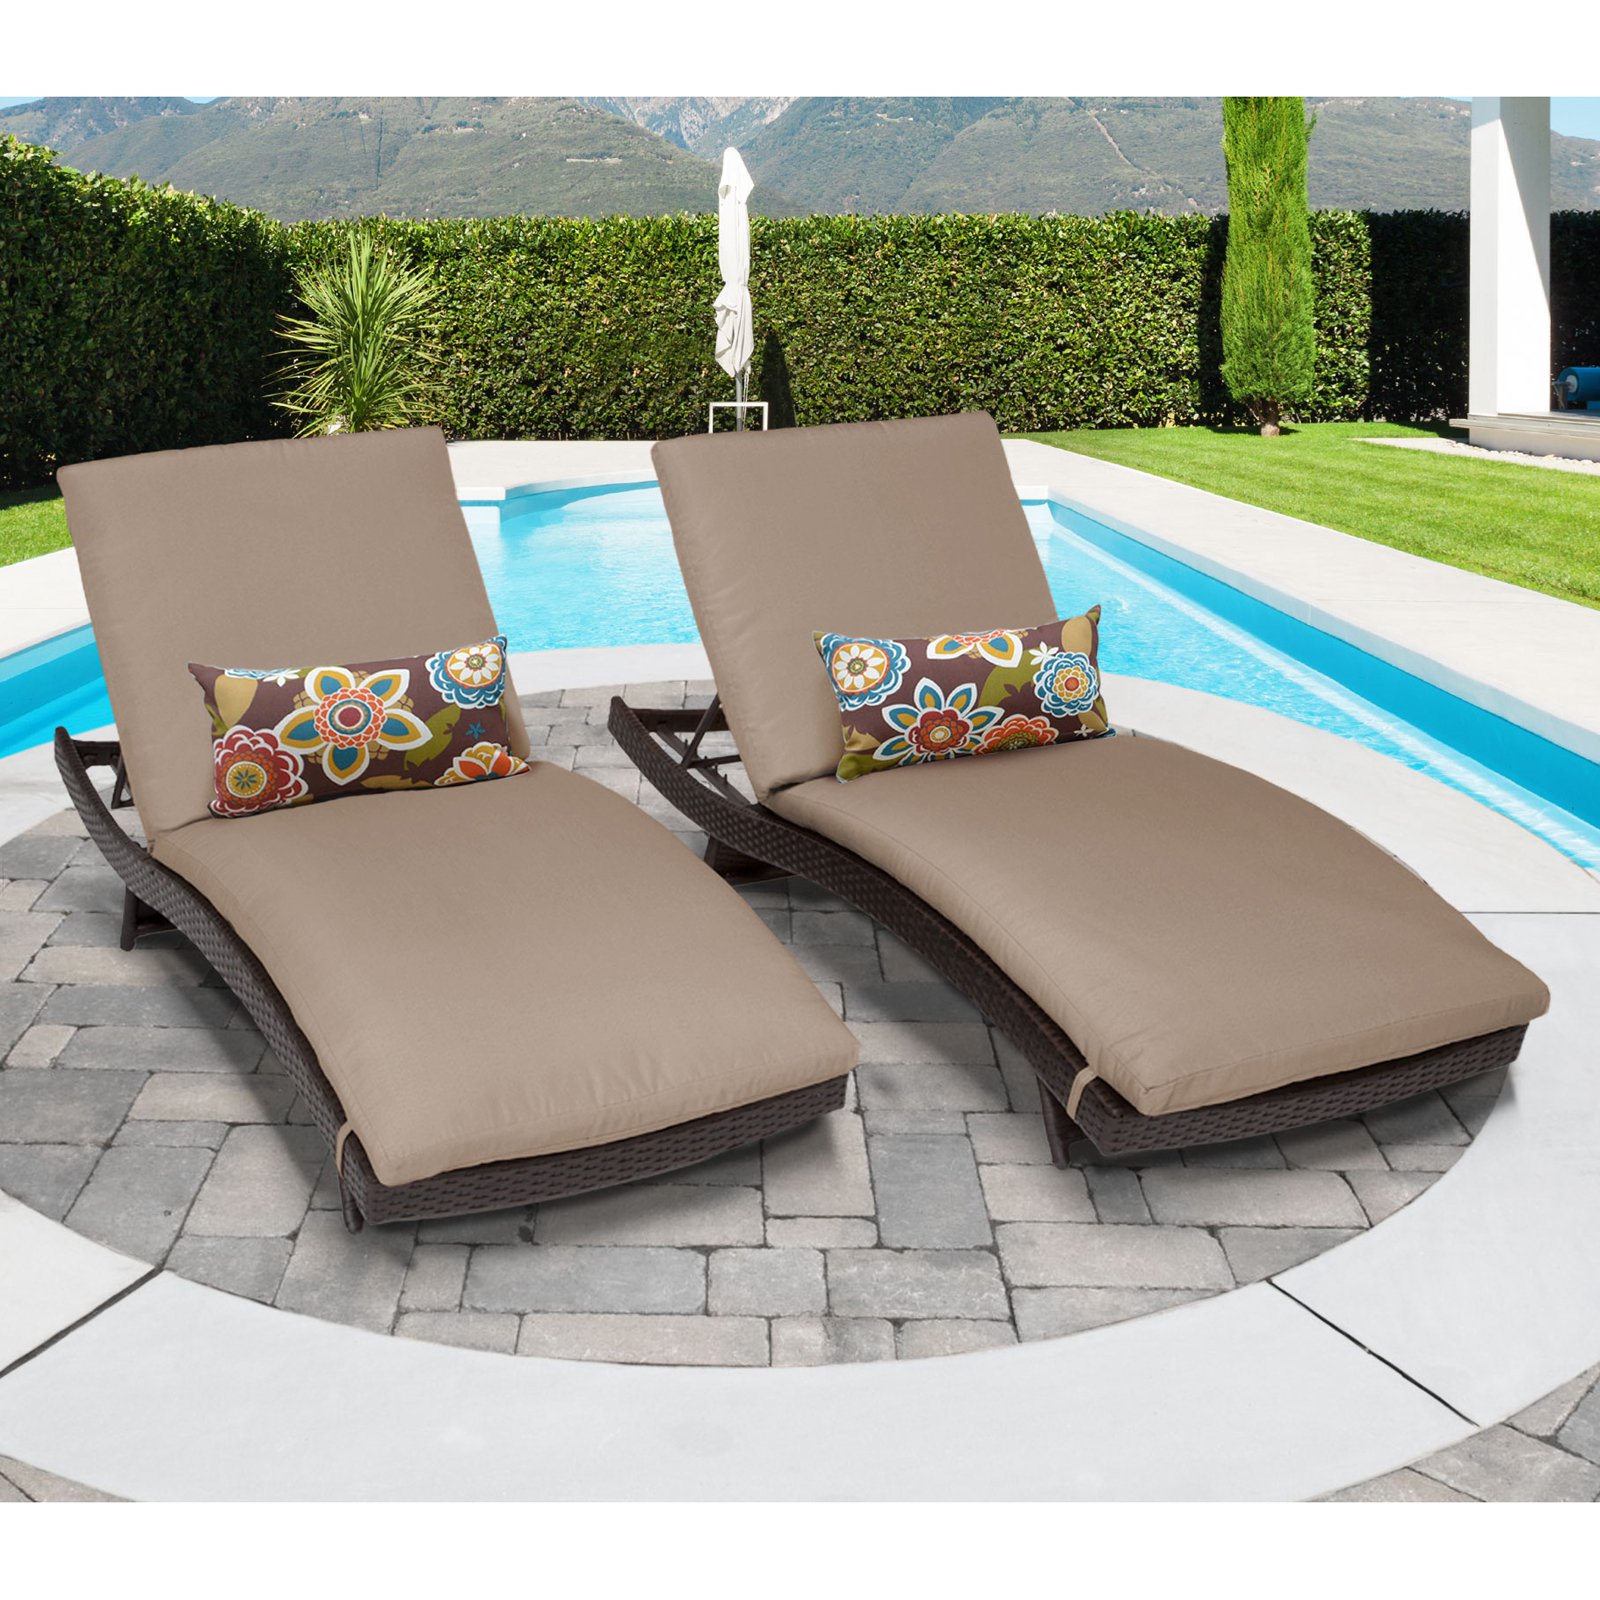 Barbados Curved Chaise Outdoor Wicker Patio Furniture in Cilantro (Set of 2) - image 3 of 4